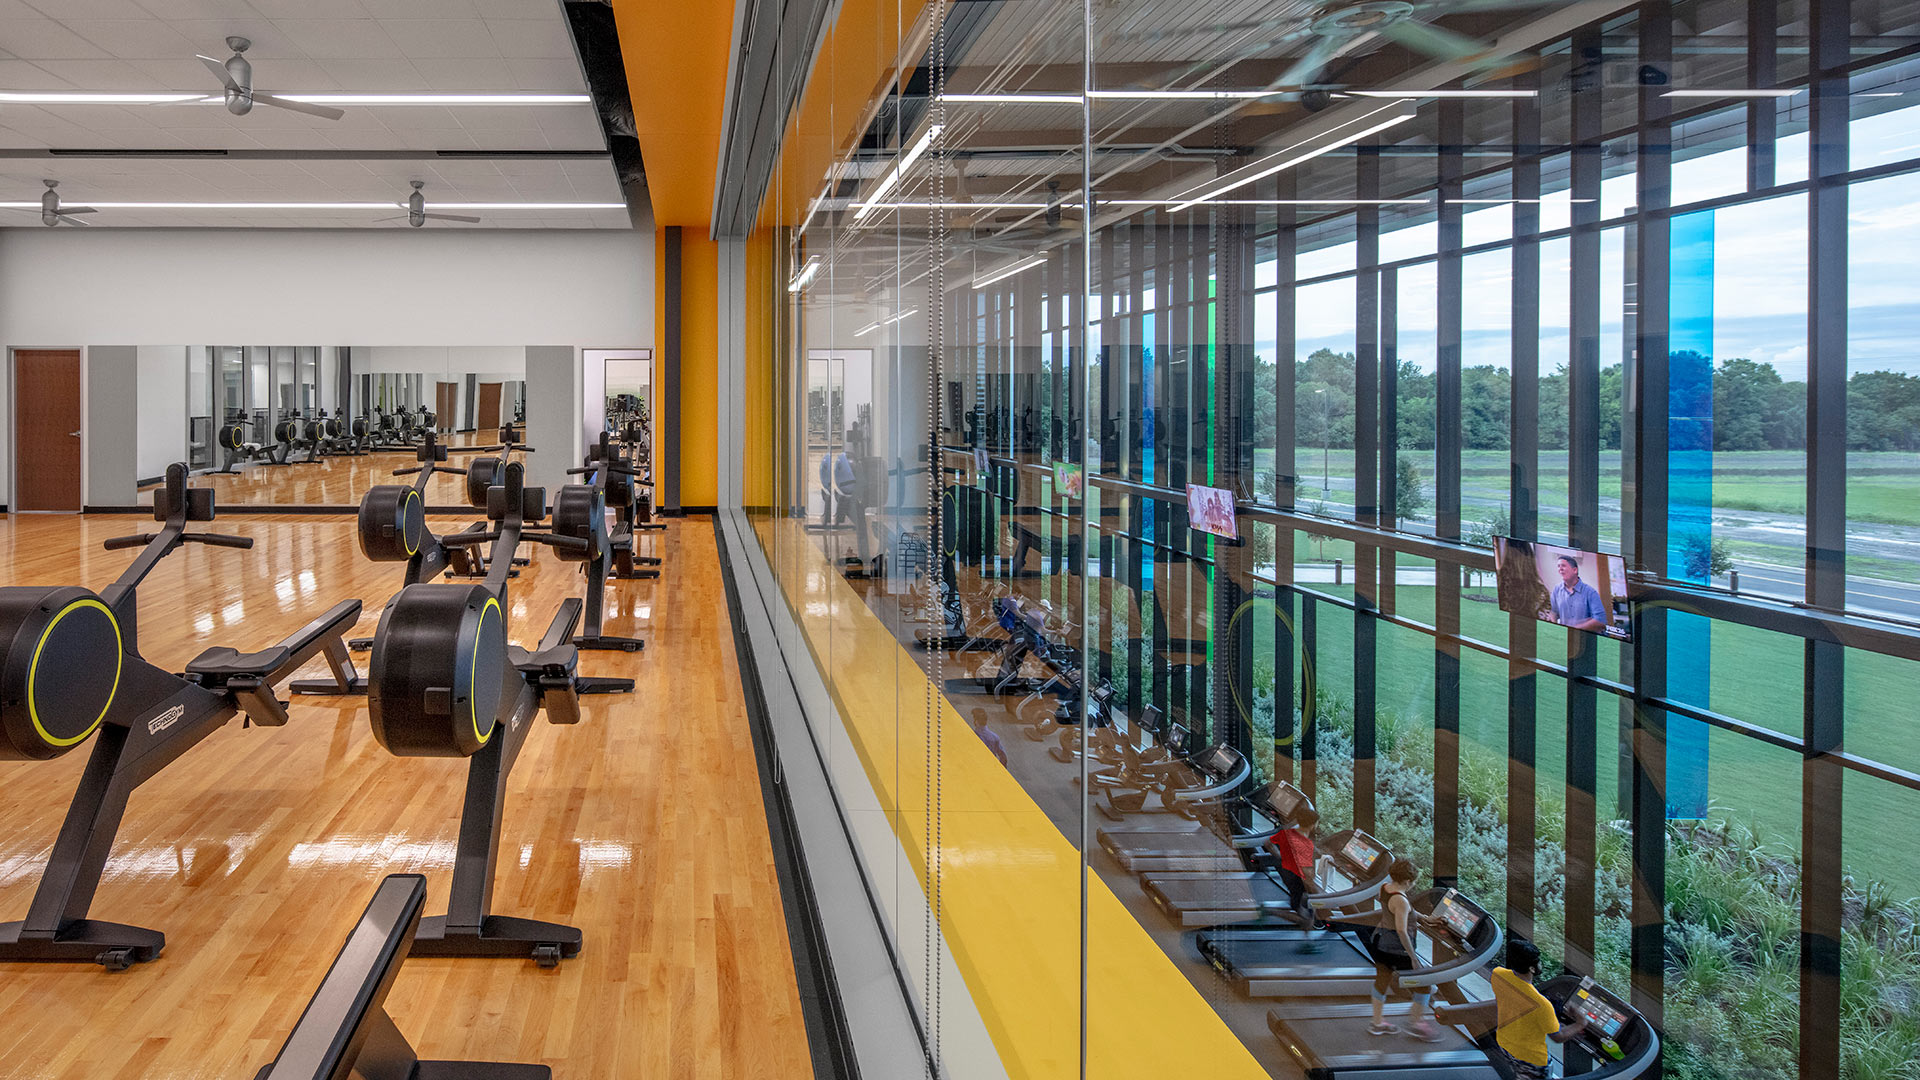 View of the multi-purpose room with stationary bikes and treadmills in the fitness zone below